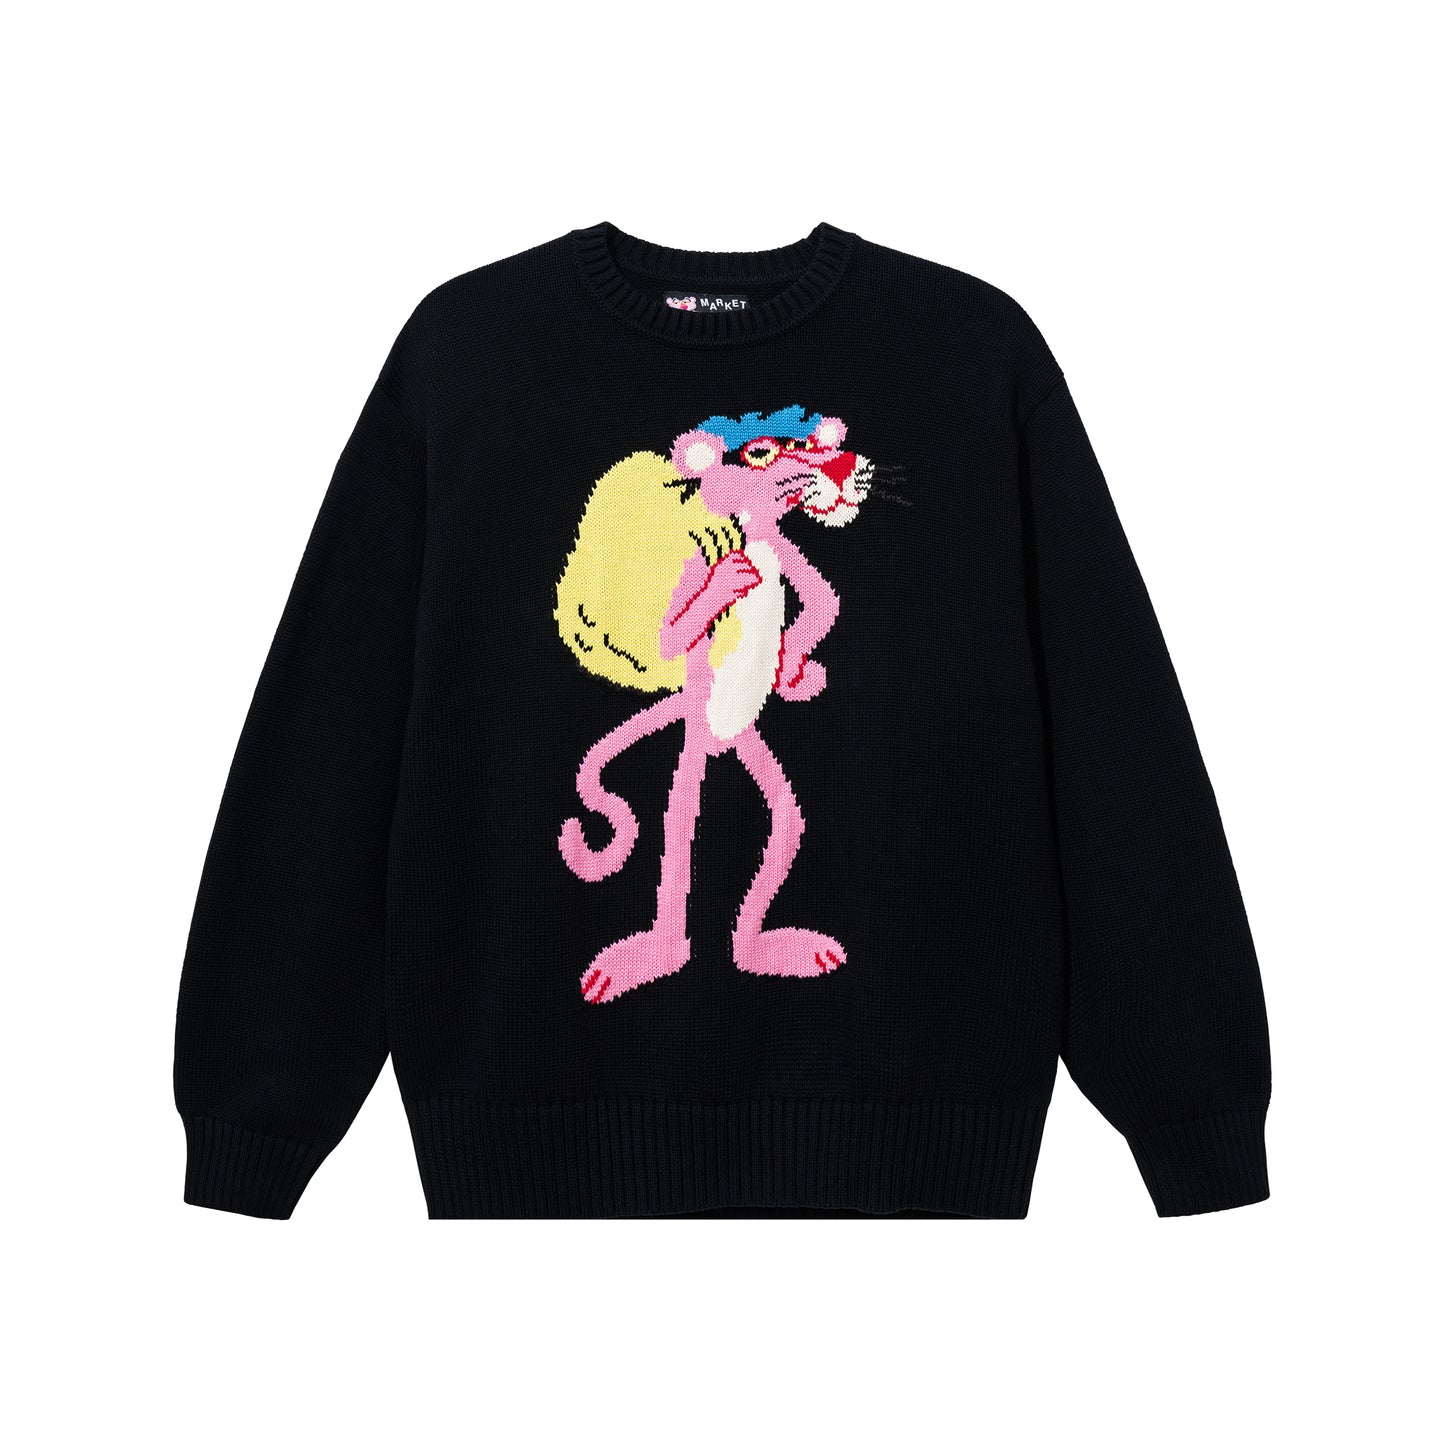 MARKET clothing brand PINK PANTHER HEIST SWEATER. Find more graphic tees, jackets, cardigans and more at MarketStudios.com. Formally Chinatown Market.